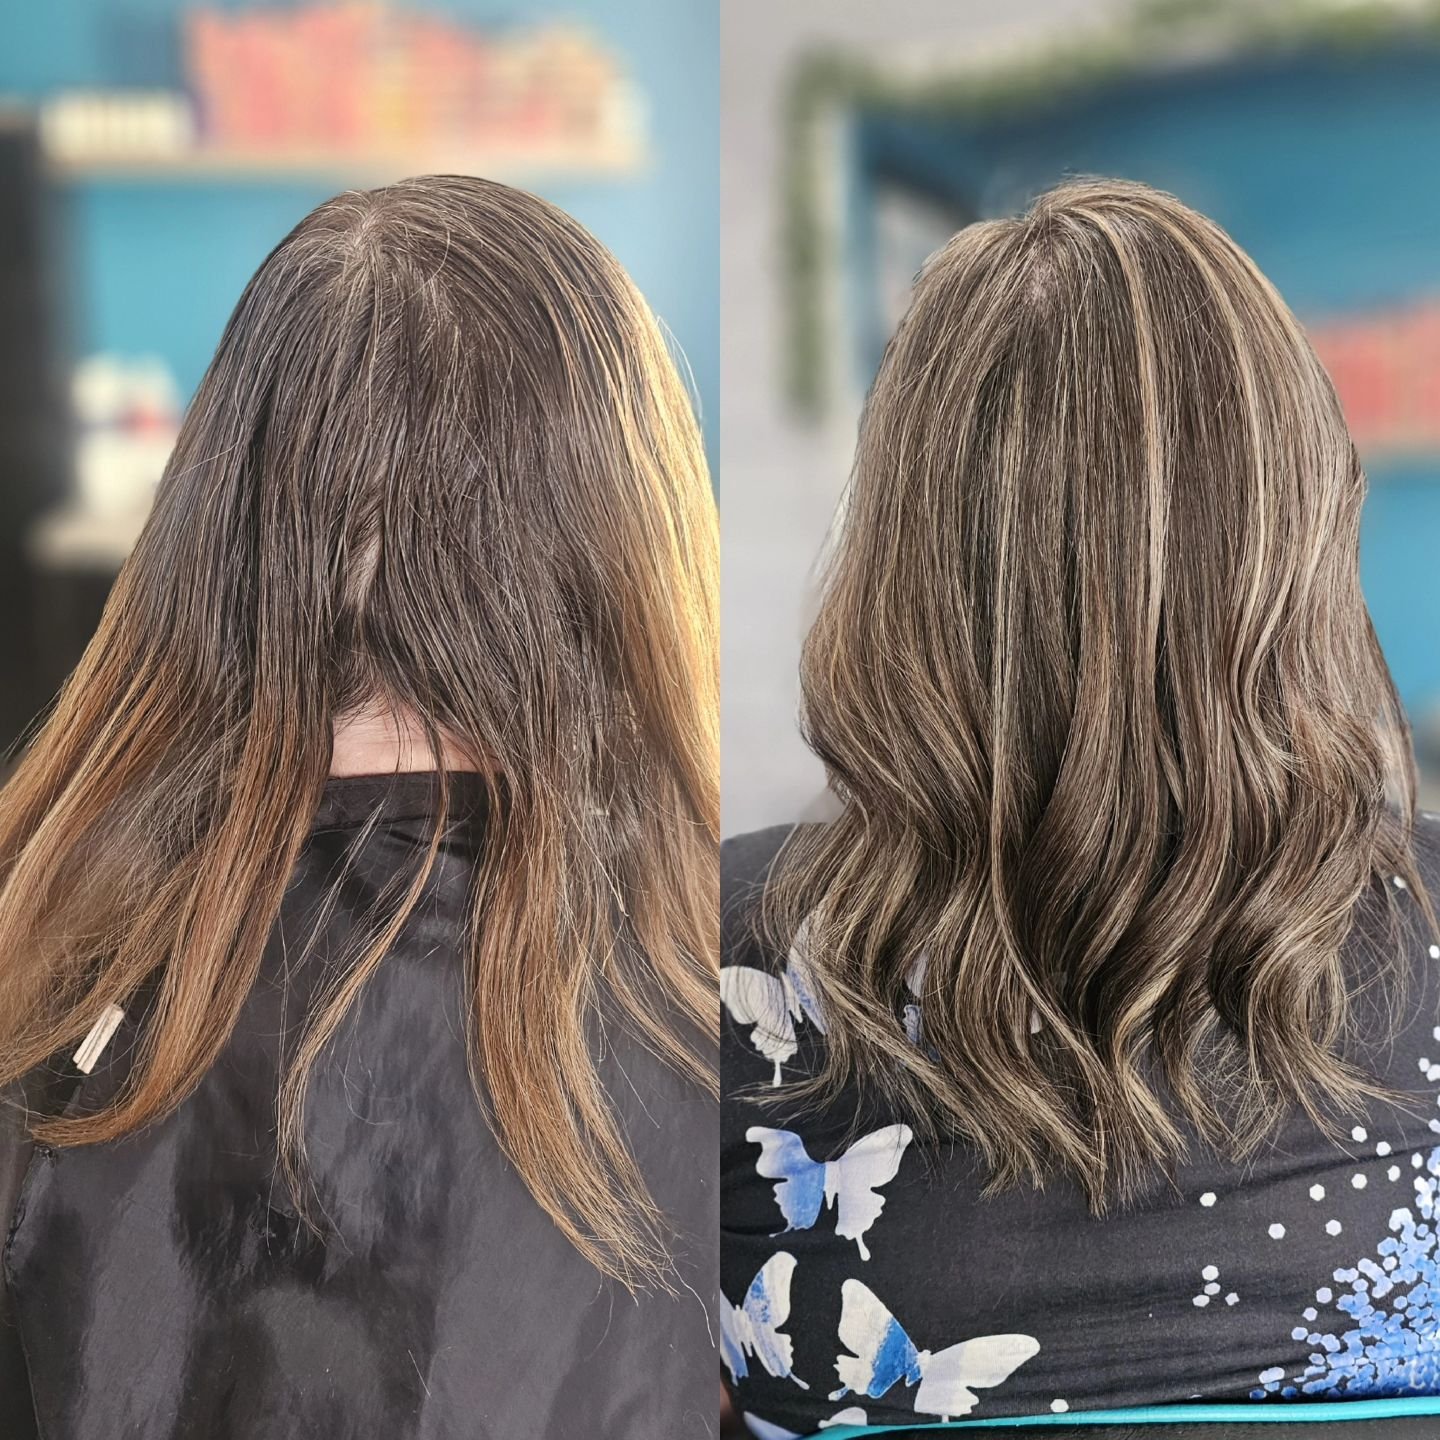 Taking her back to her natural roots! From brass to sass!  These transformations keep me passionate about my love for hair! Just look at the before!!! 
#greyblending #transformation #colorspecialist #beforeandafter #719hairstylist #coloradohair #home